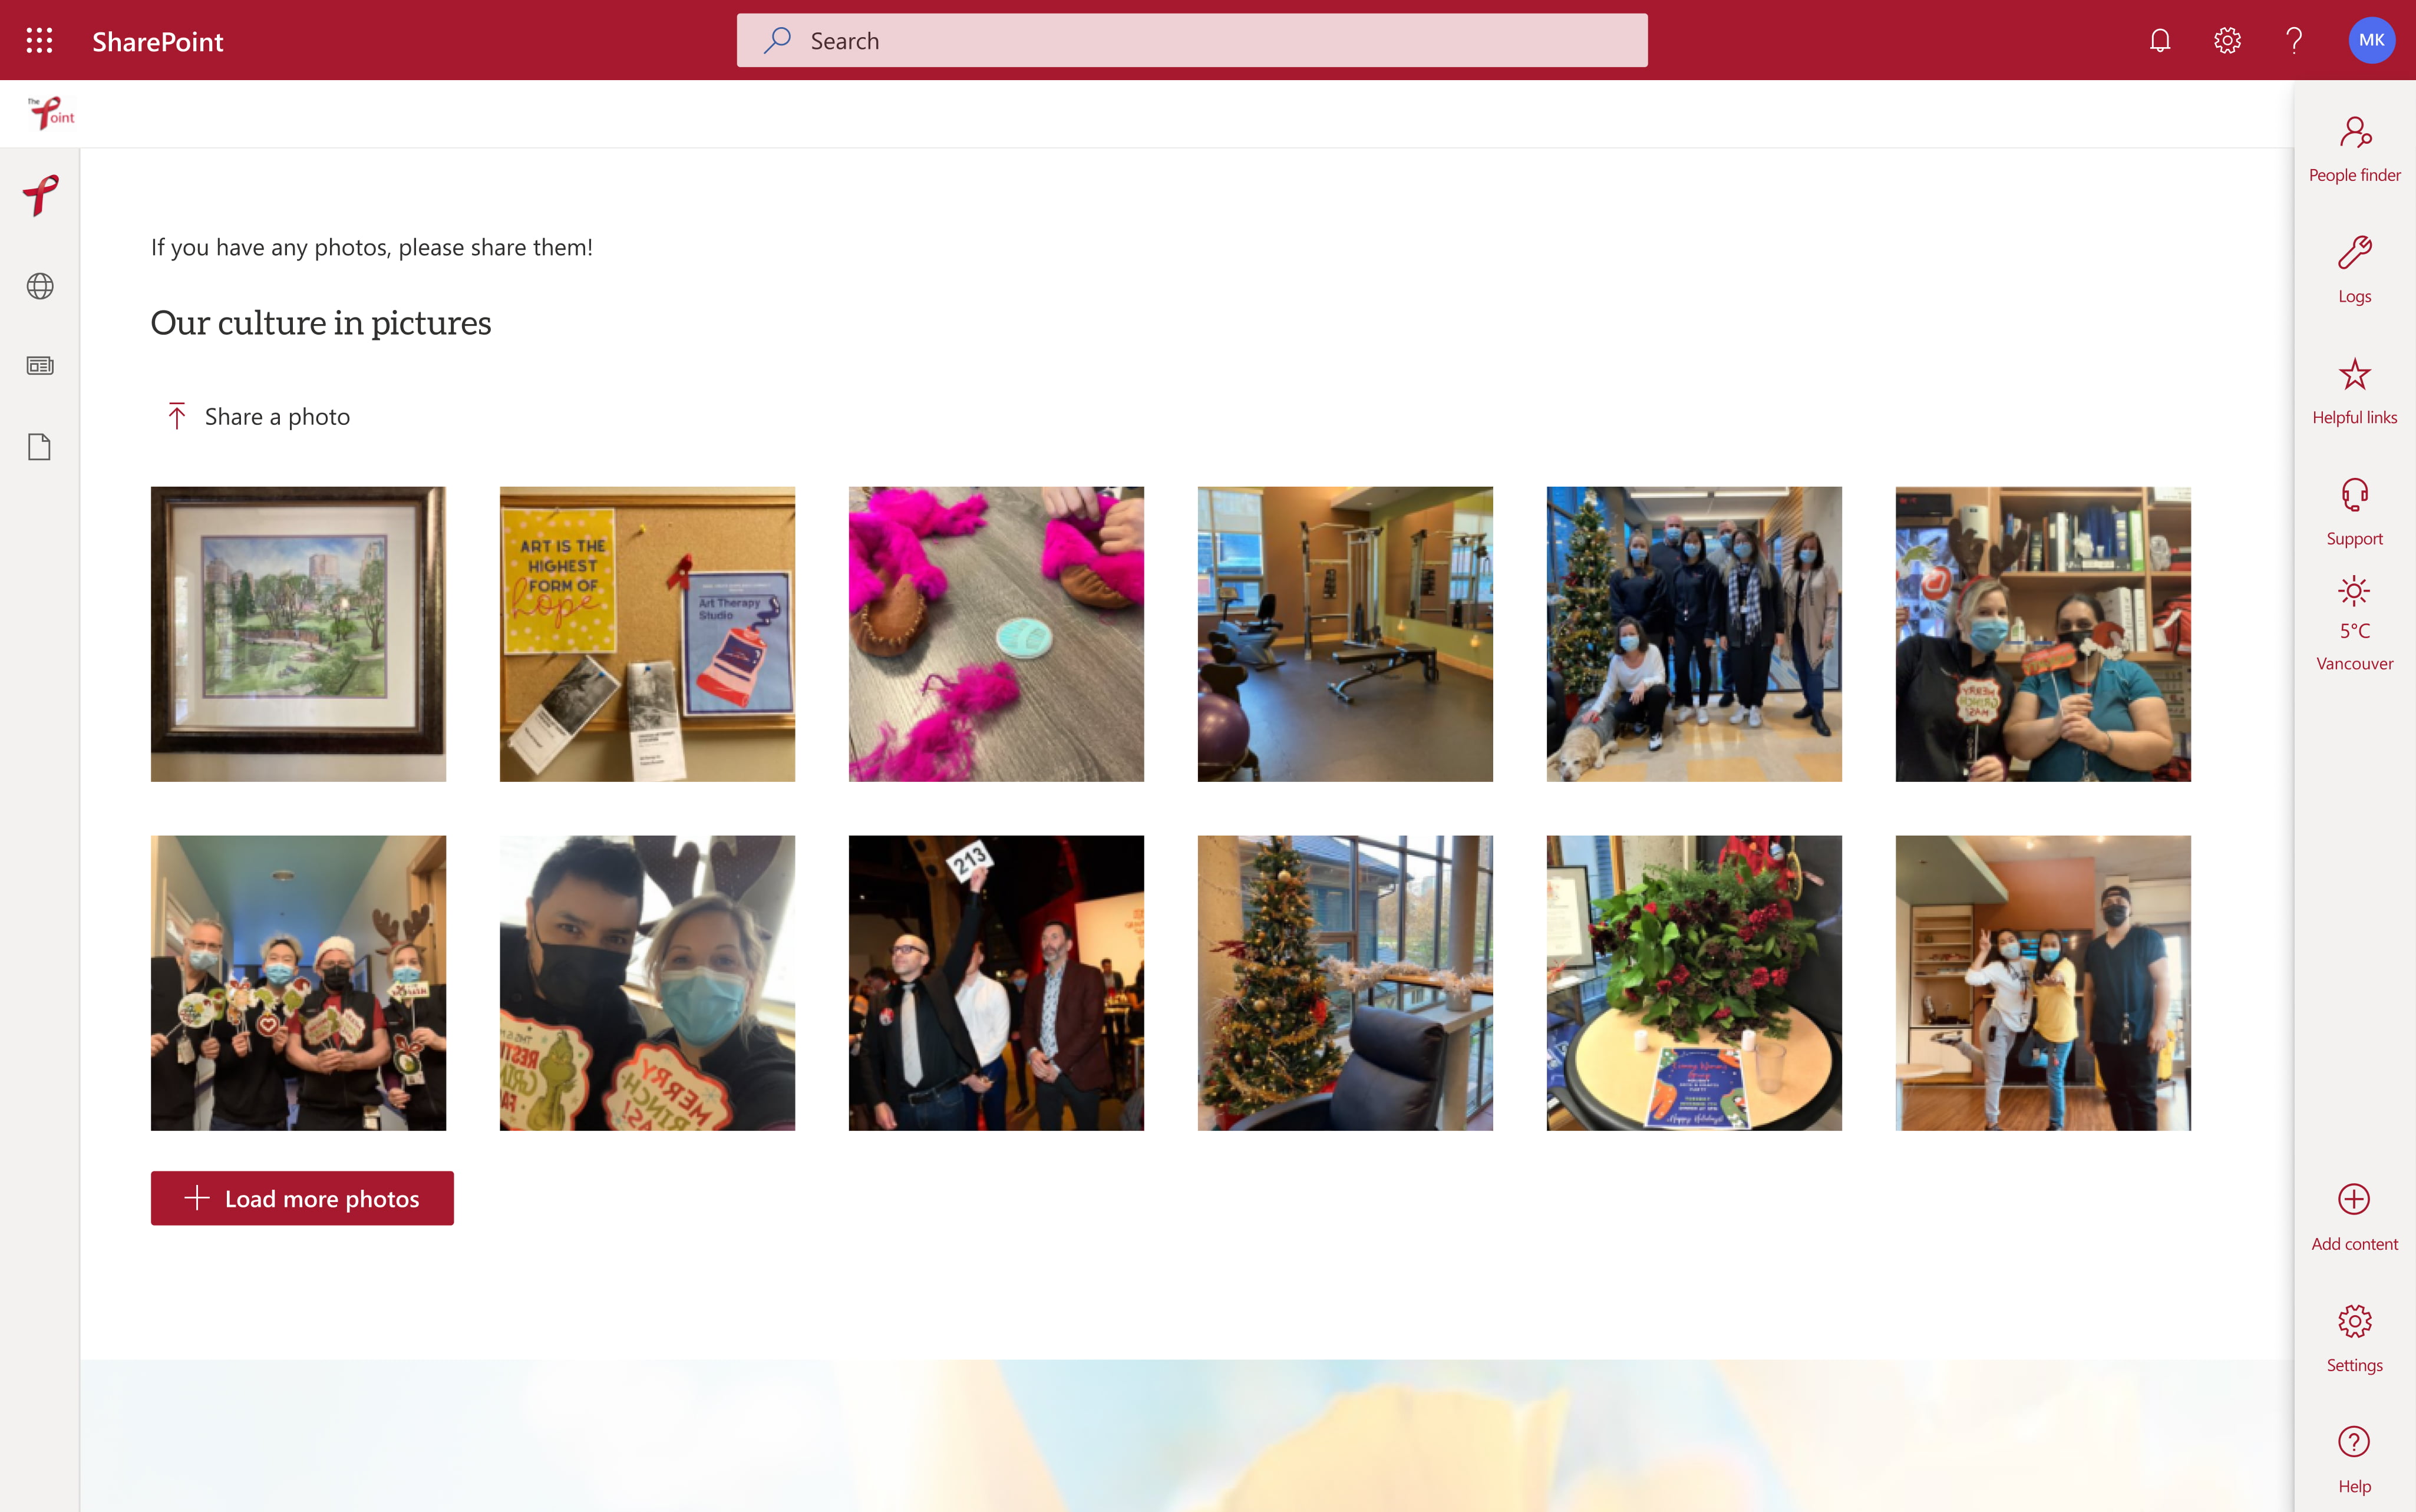 The desktop view of the submit a photo web part on Dr. Peter's GO intranet homepage.